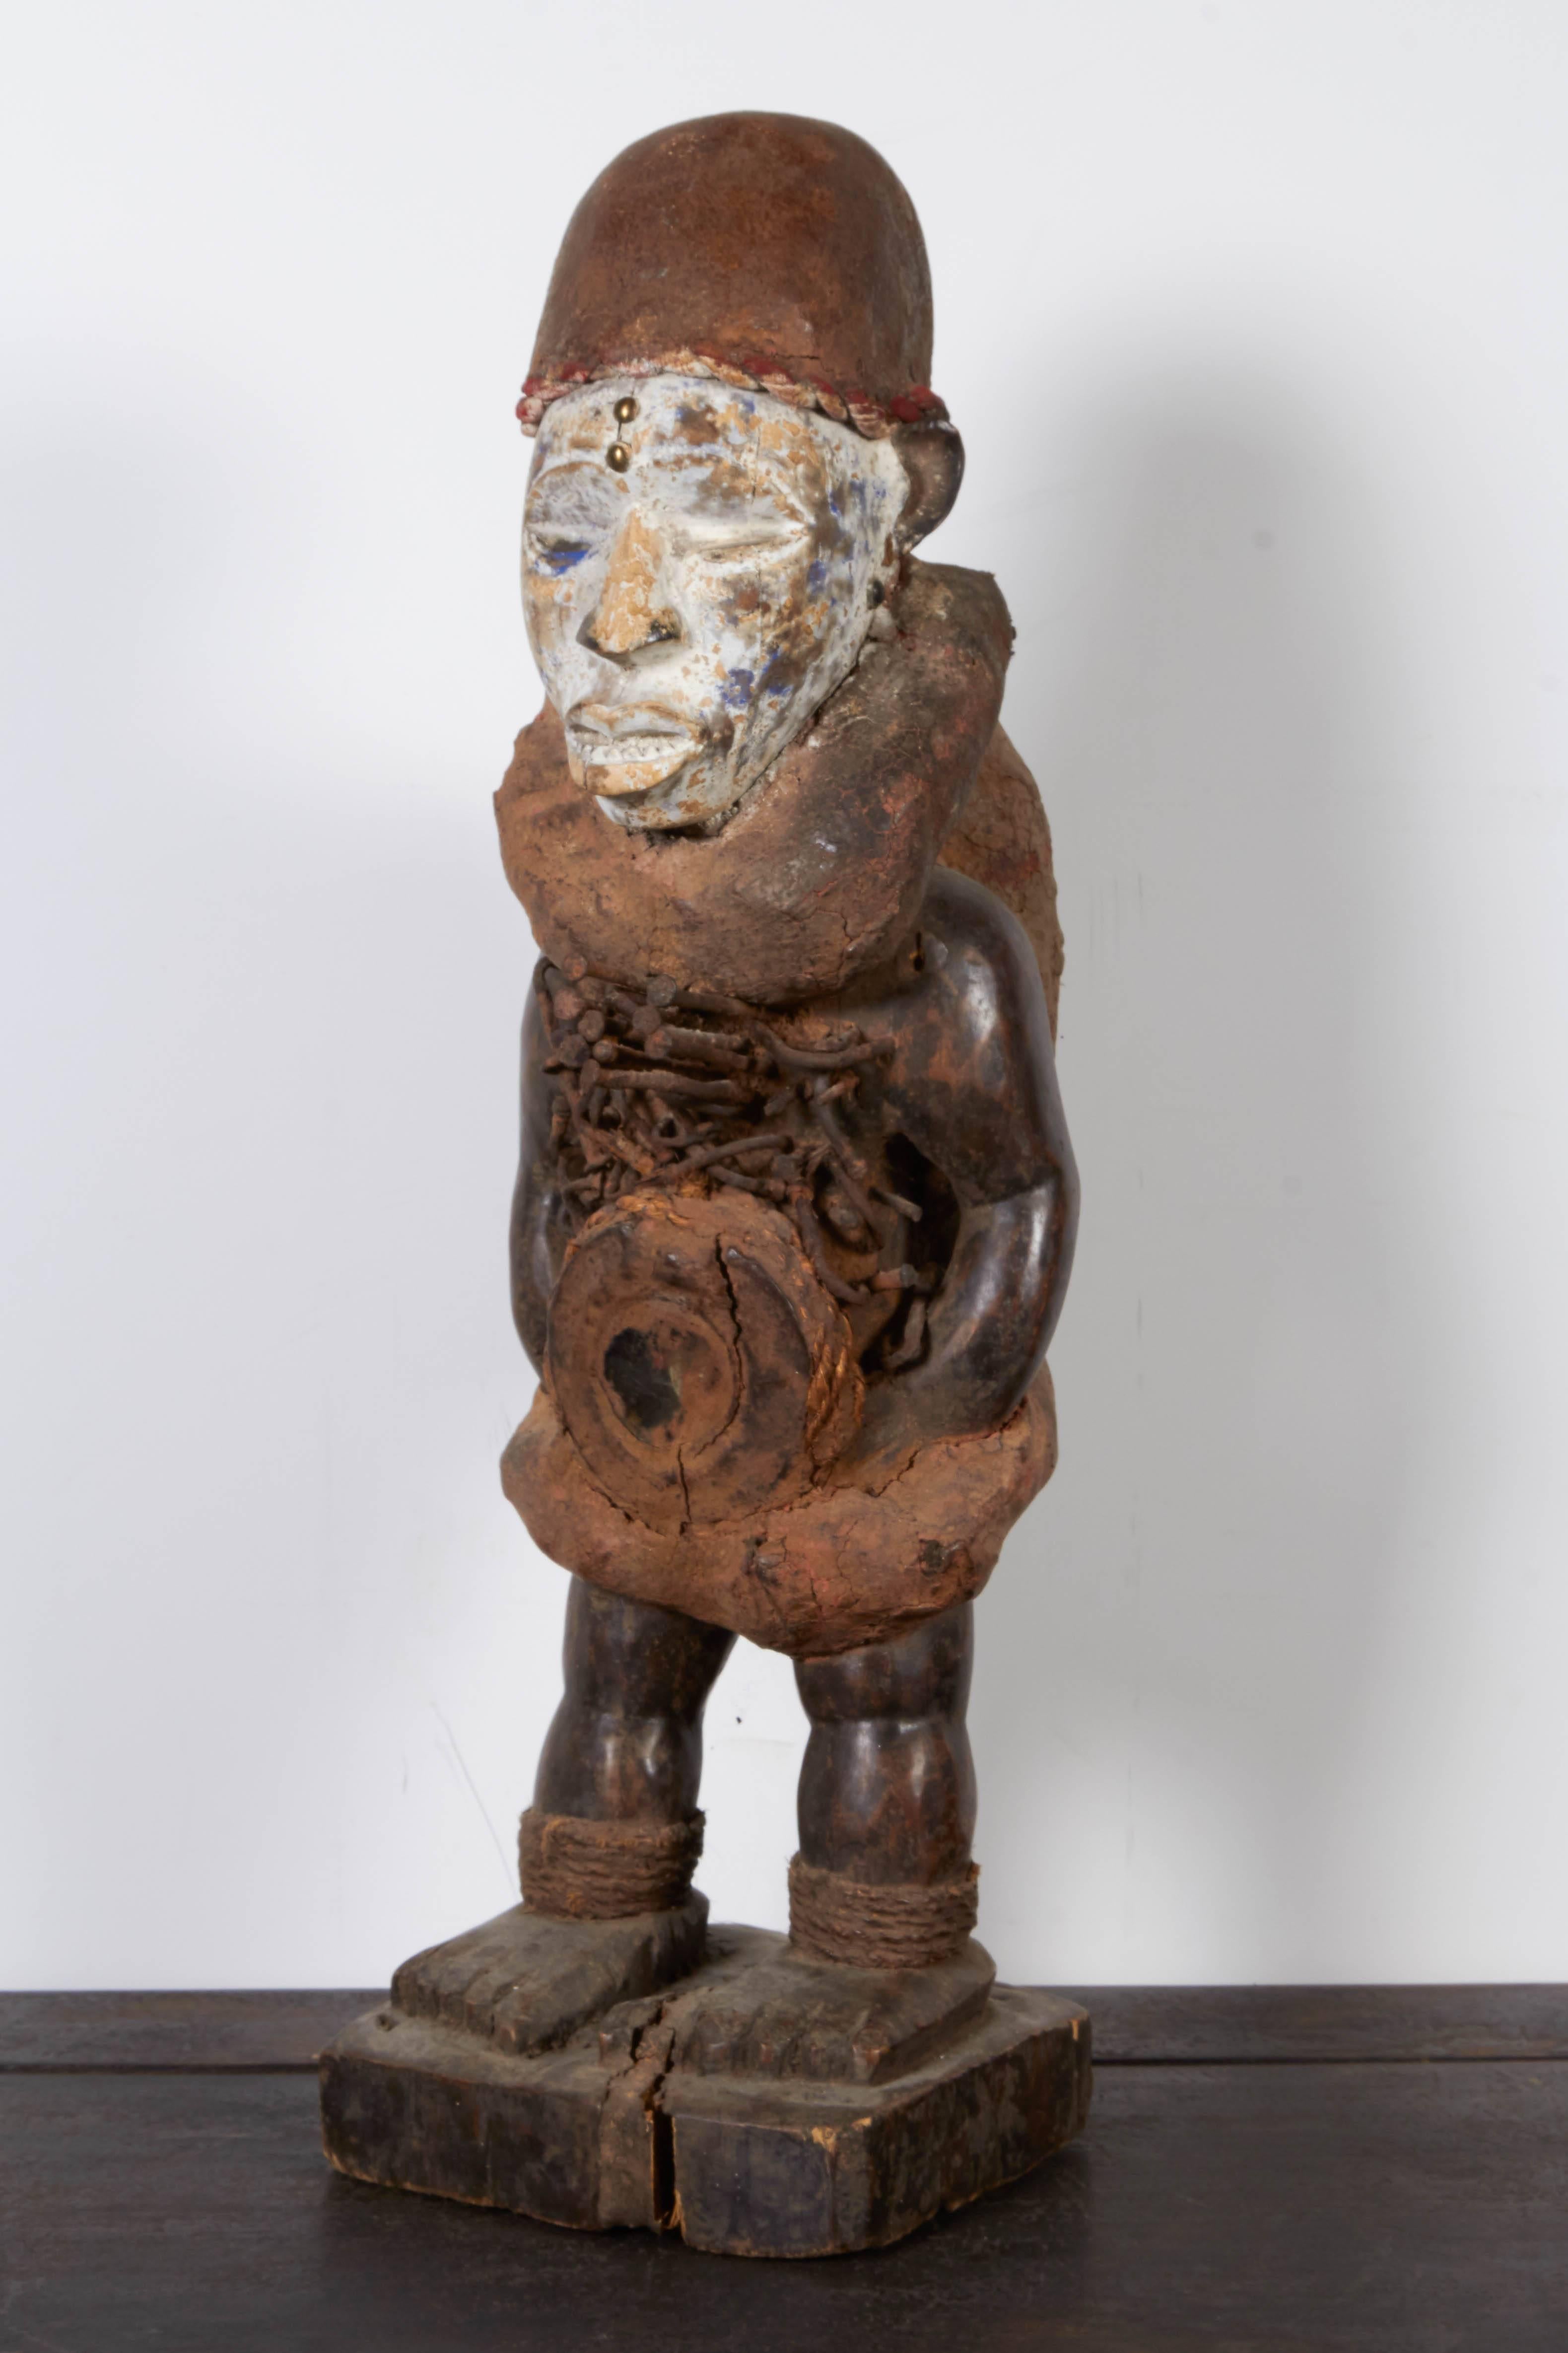 A worn, weathered and finely carved and colored divination figure from the Congo. This very detailed African carving features a striking face with faded white paint emphasizing his expression. Diviners are often consulted regarding solving important